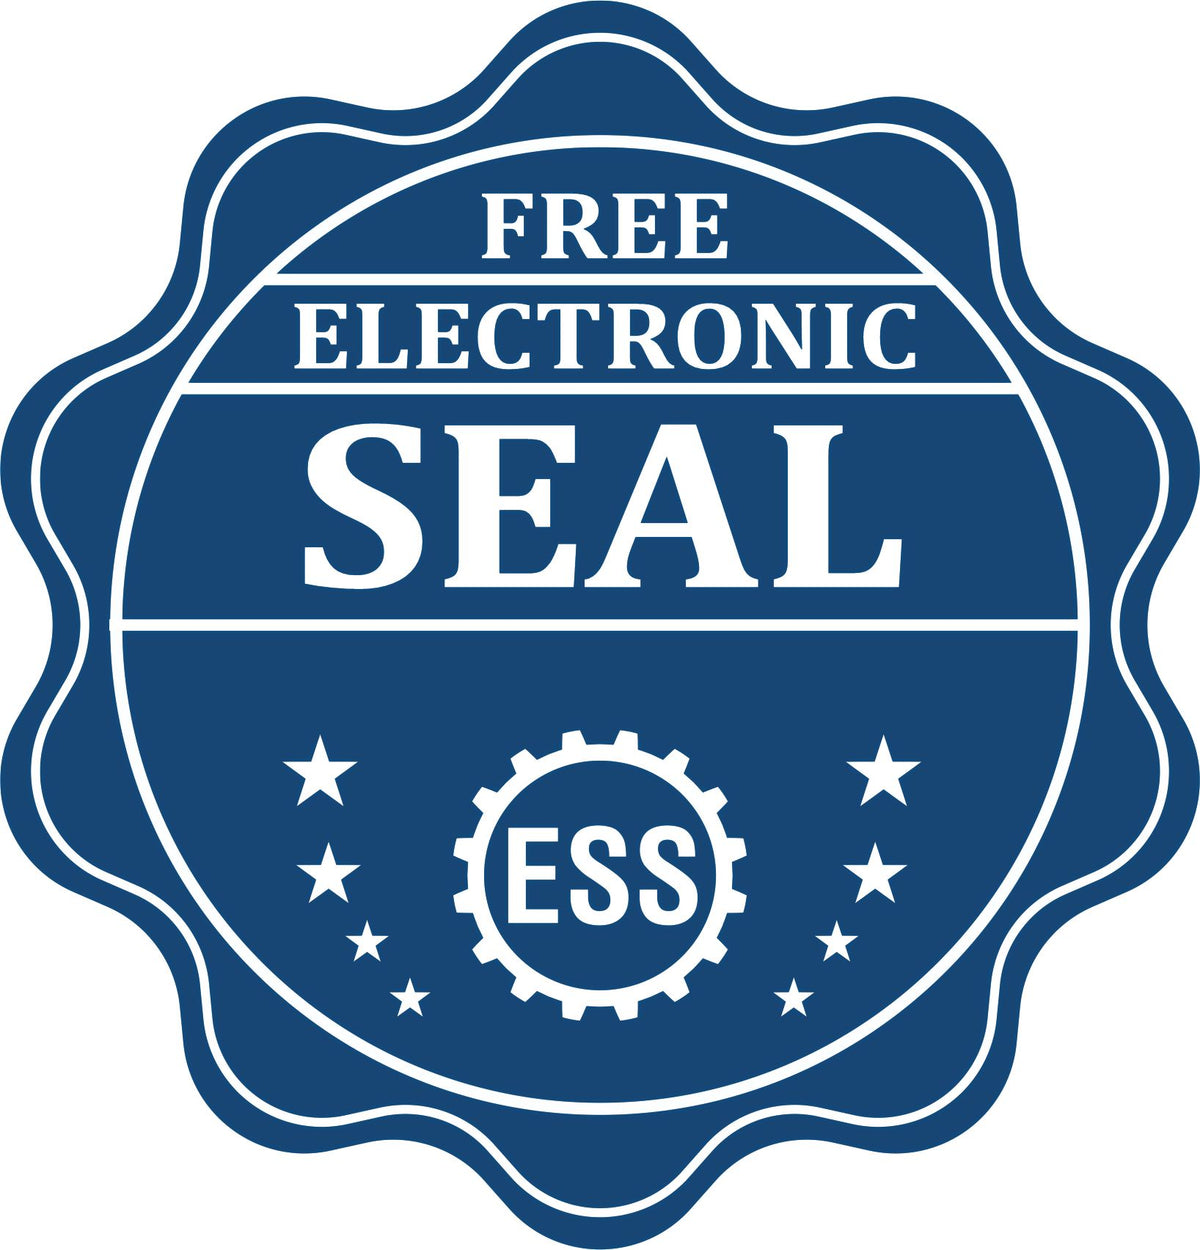 A badge showing a free electronic seal for the Florida Professional Engineer Seal Stamp with stars and the ESS gear on the emblem.